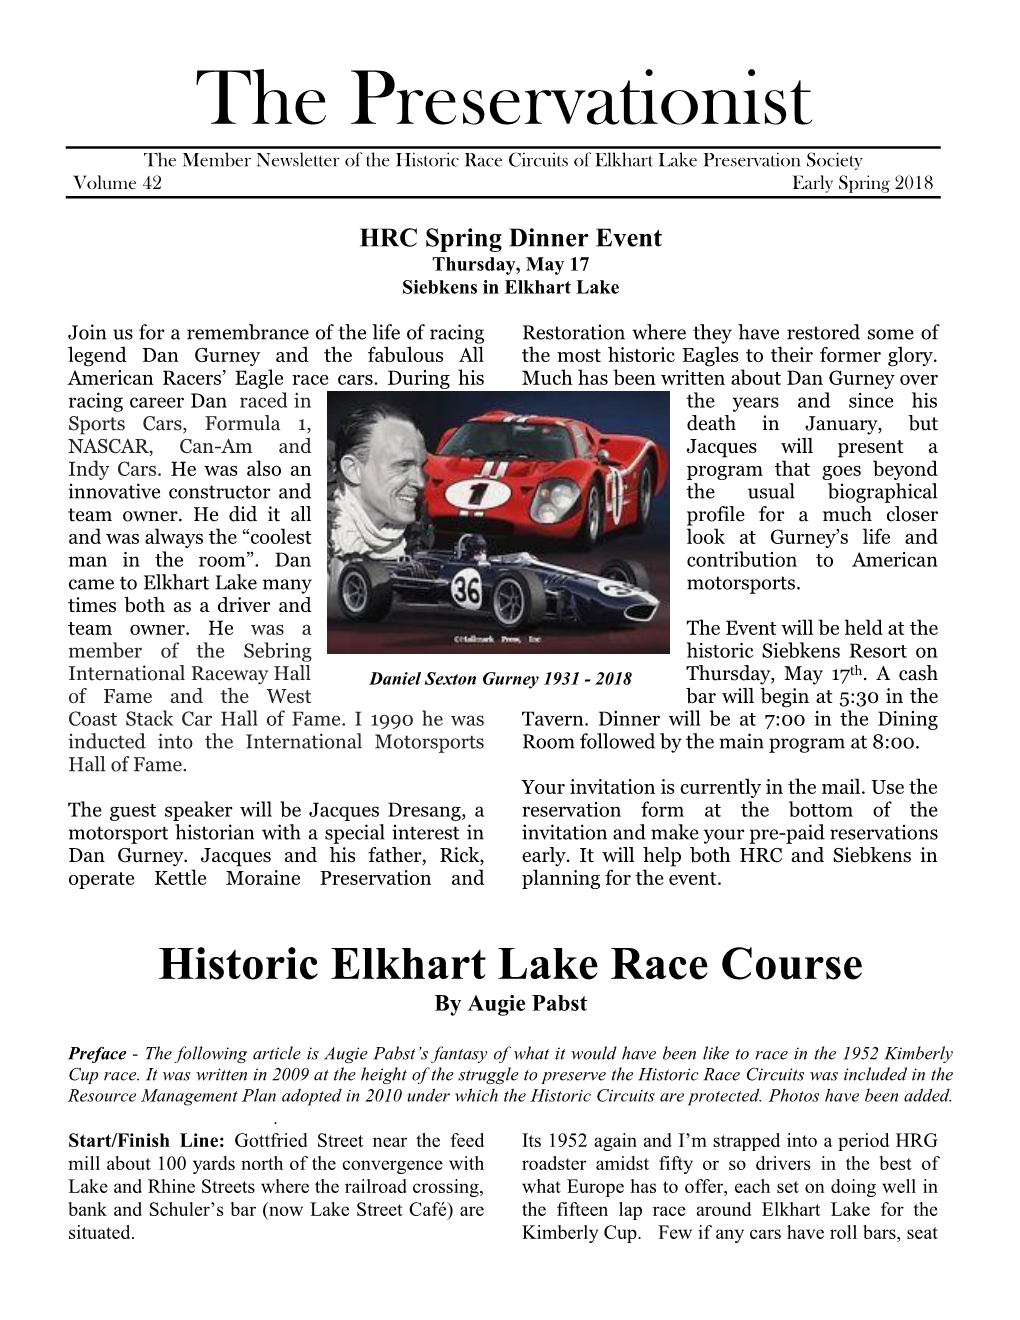 The Preservationist the Member Newsletter of the Historic Race Circuits of Elkhart Lake Preservation Society Volume 42 Early Spring 2018